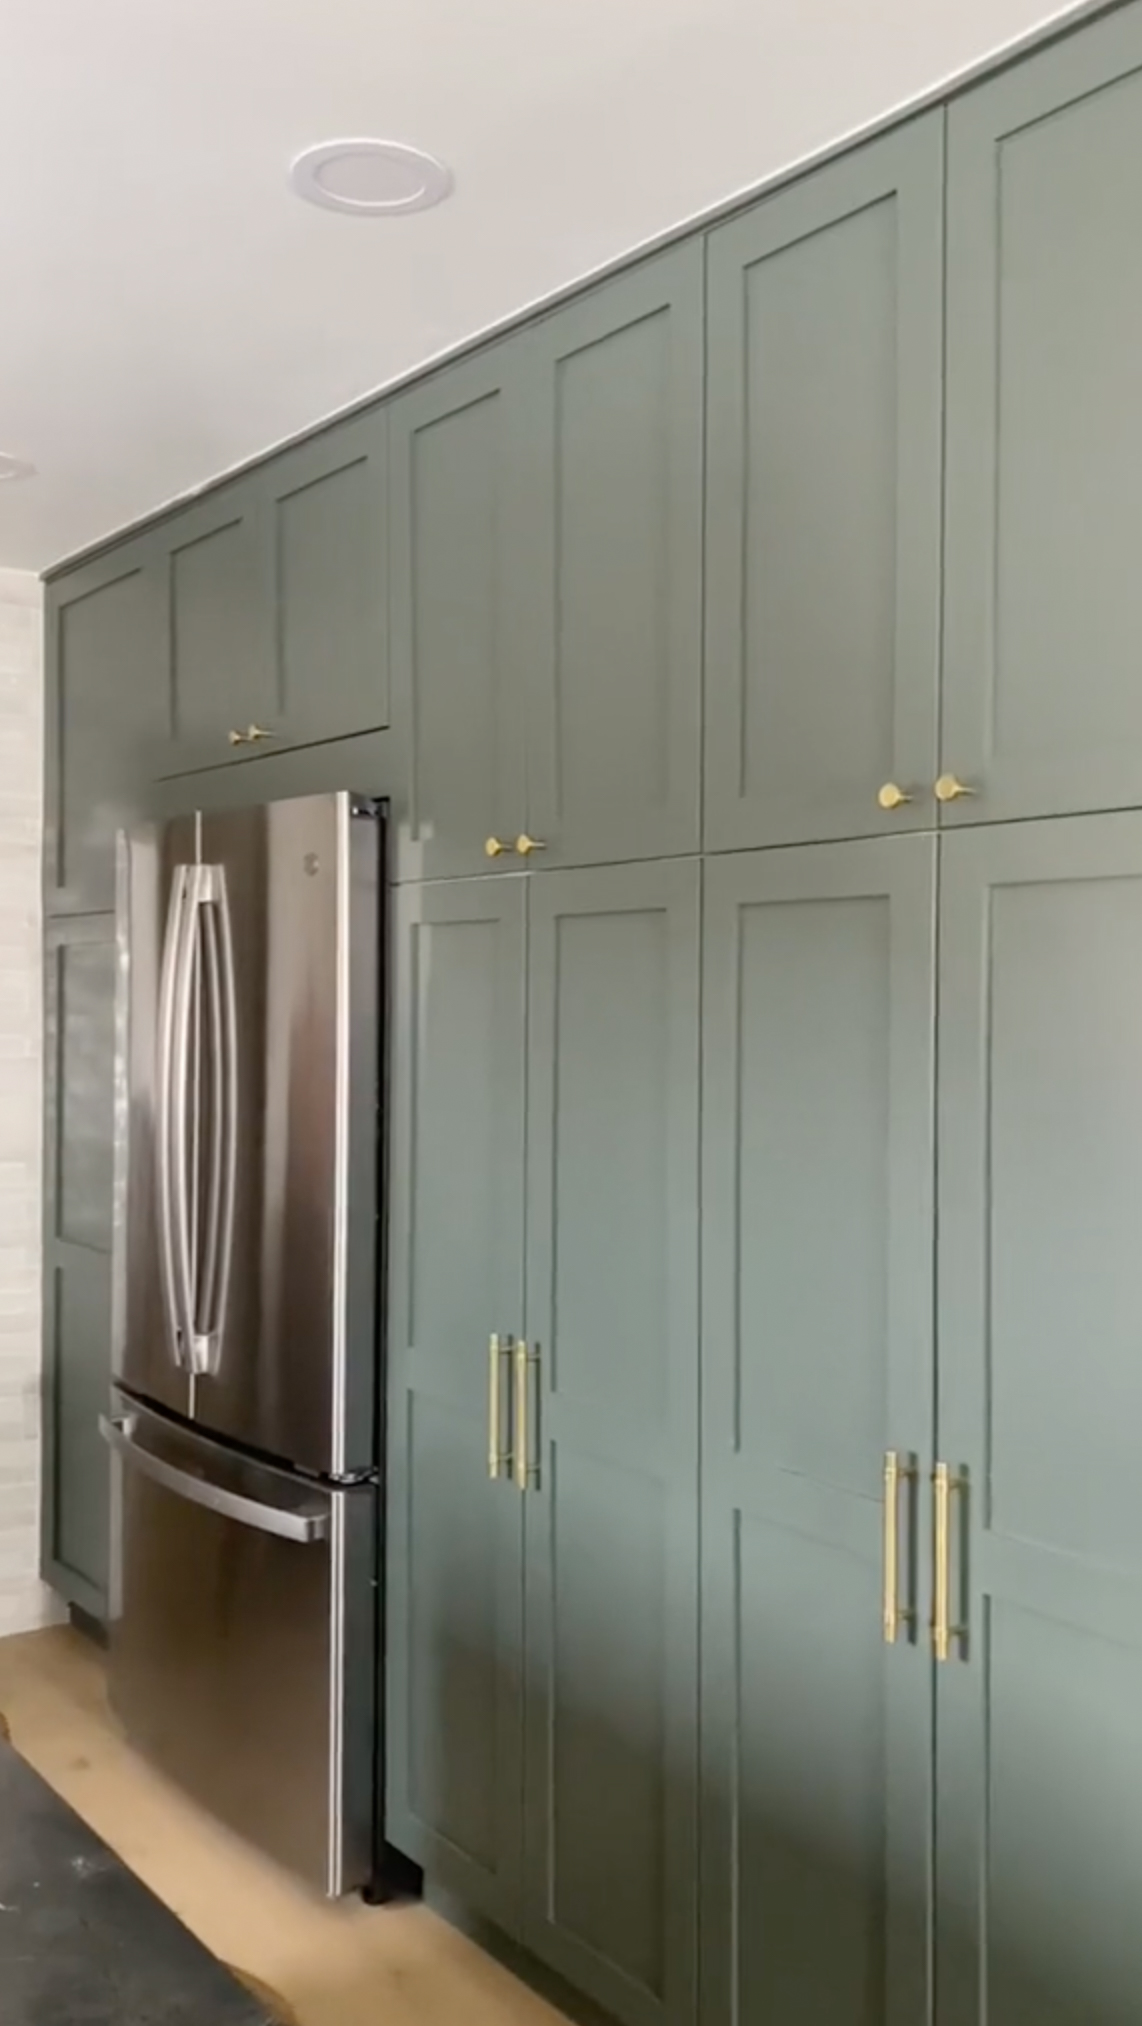 The kitchen now has modern green cupboards and white tiles on the walls